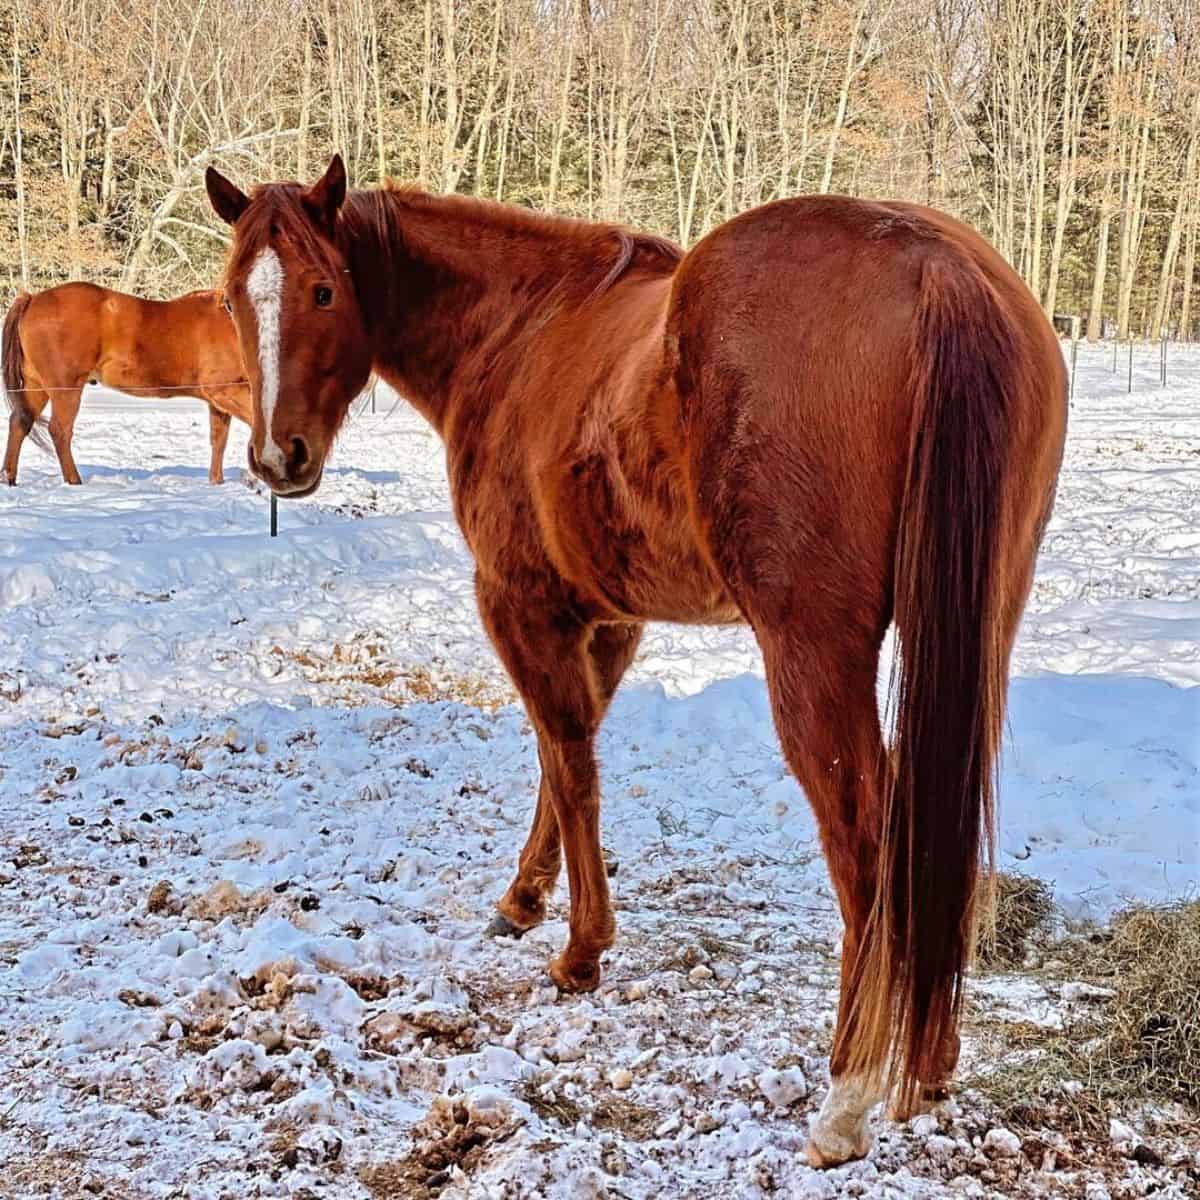 A red chestnut horse with cozy fur stands on the snow-covered ground on a ranch.